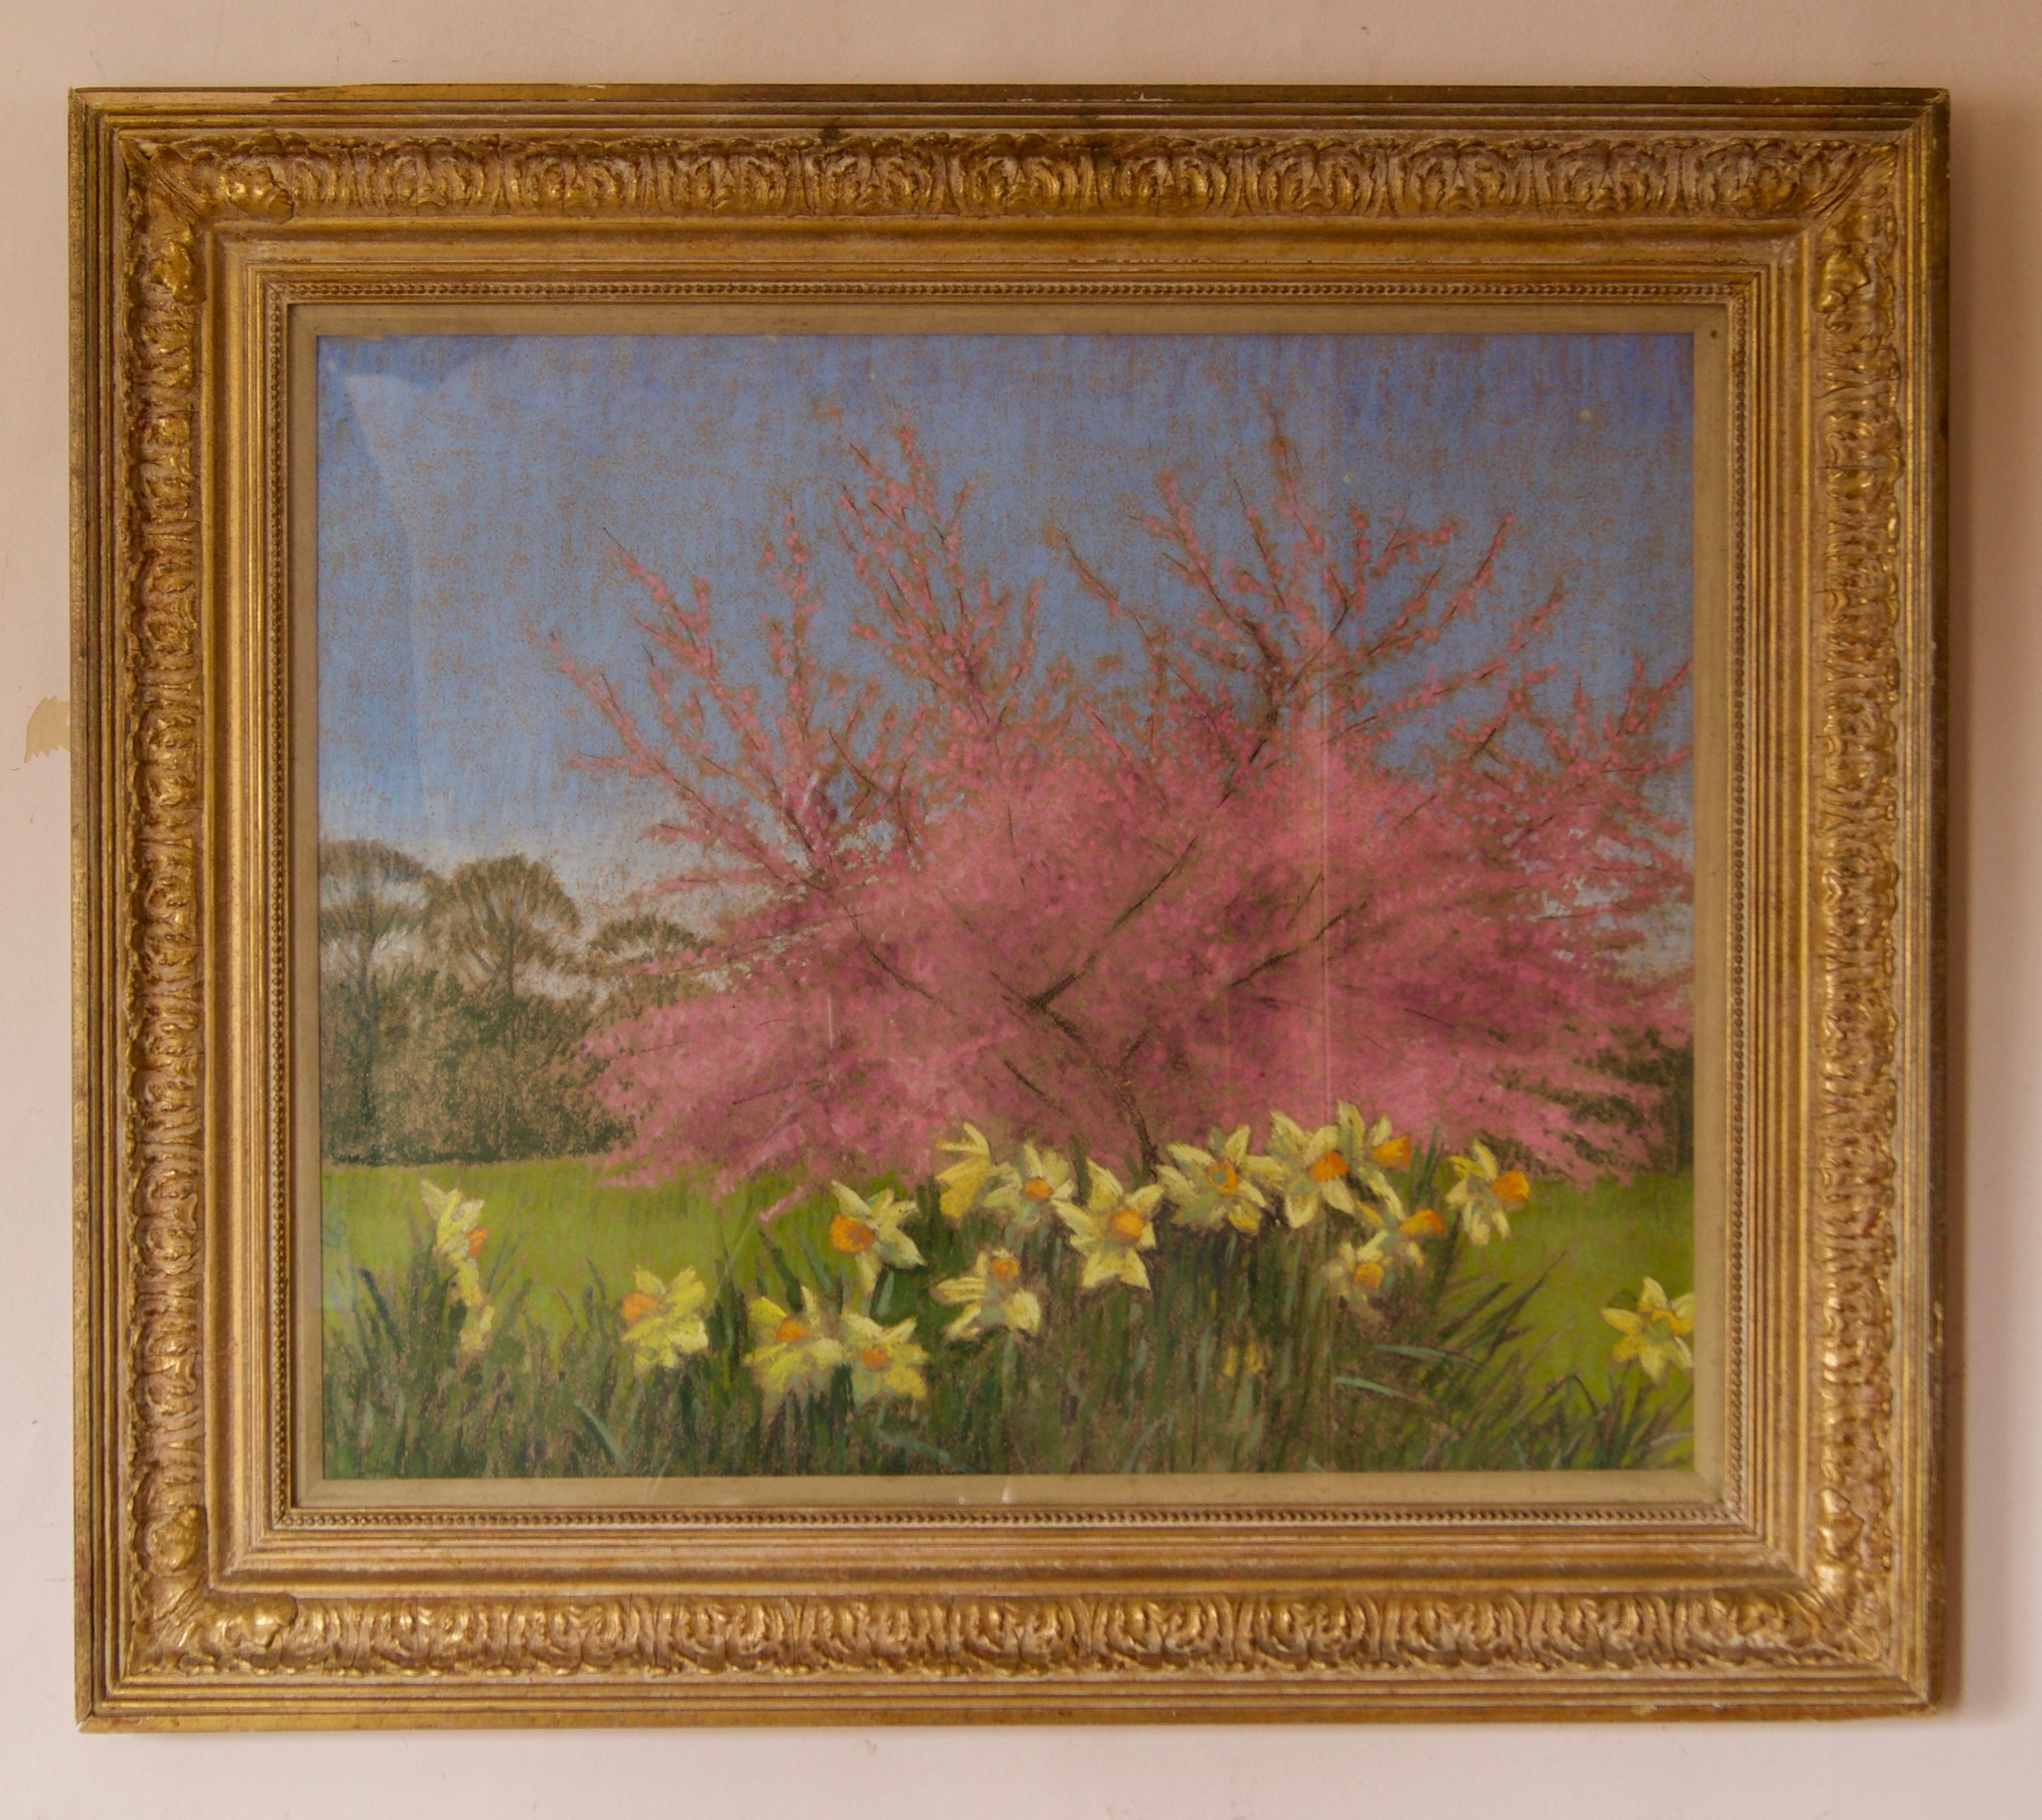 Apple Blossom Tree and Dandelions - Mid 20th Century Impressionist Landscape Oil - Painting by William Henry Innes